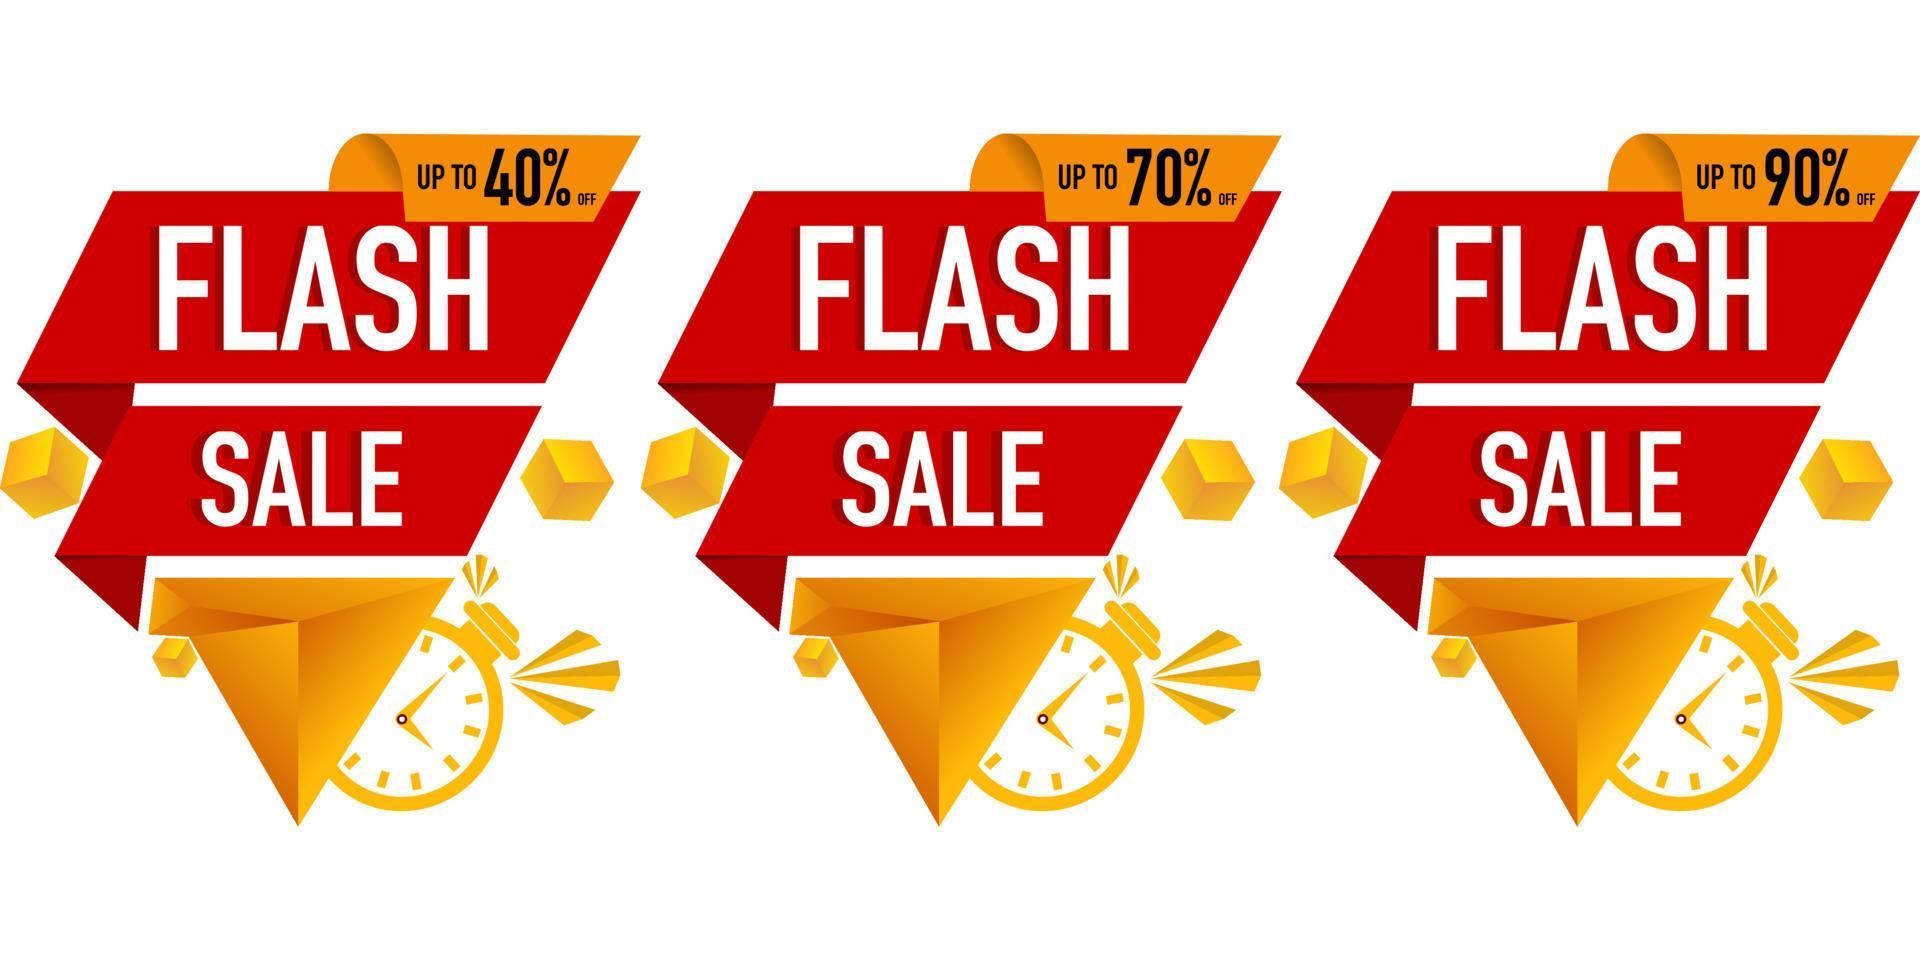 Flash sale banner template design for web or social media. Special offer discounts, One day big sale, special offers. Sales banner template design, Super Sale, end of season special offer banner. vector